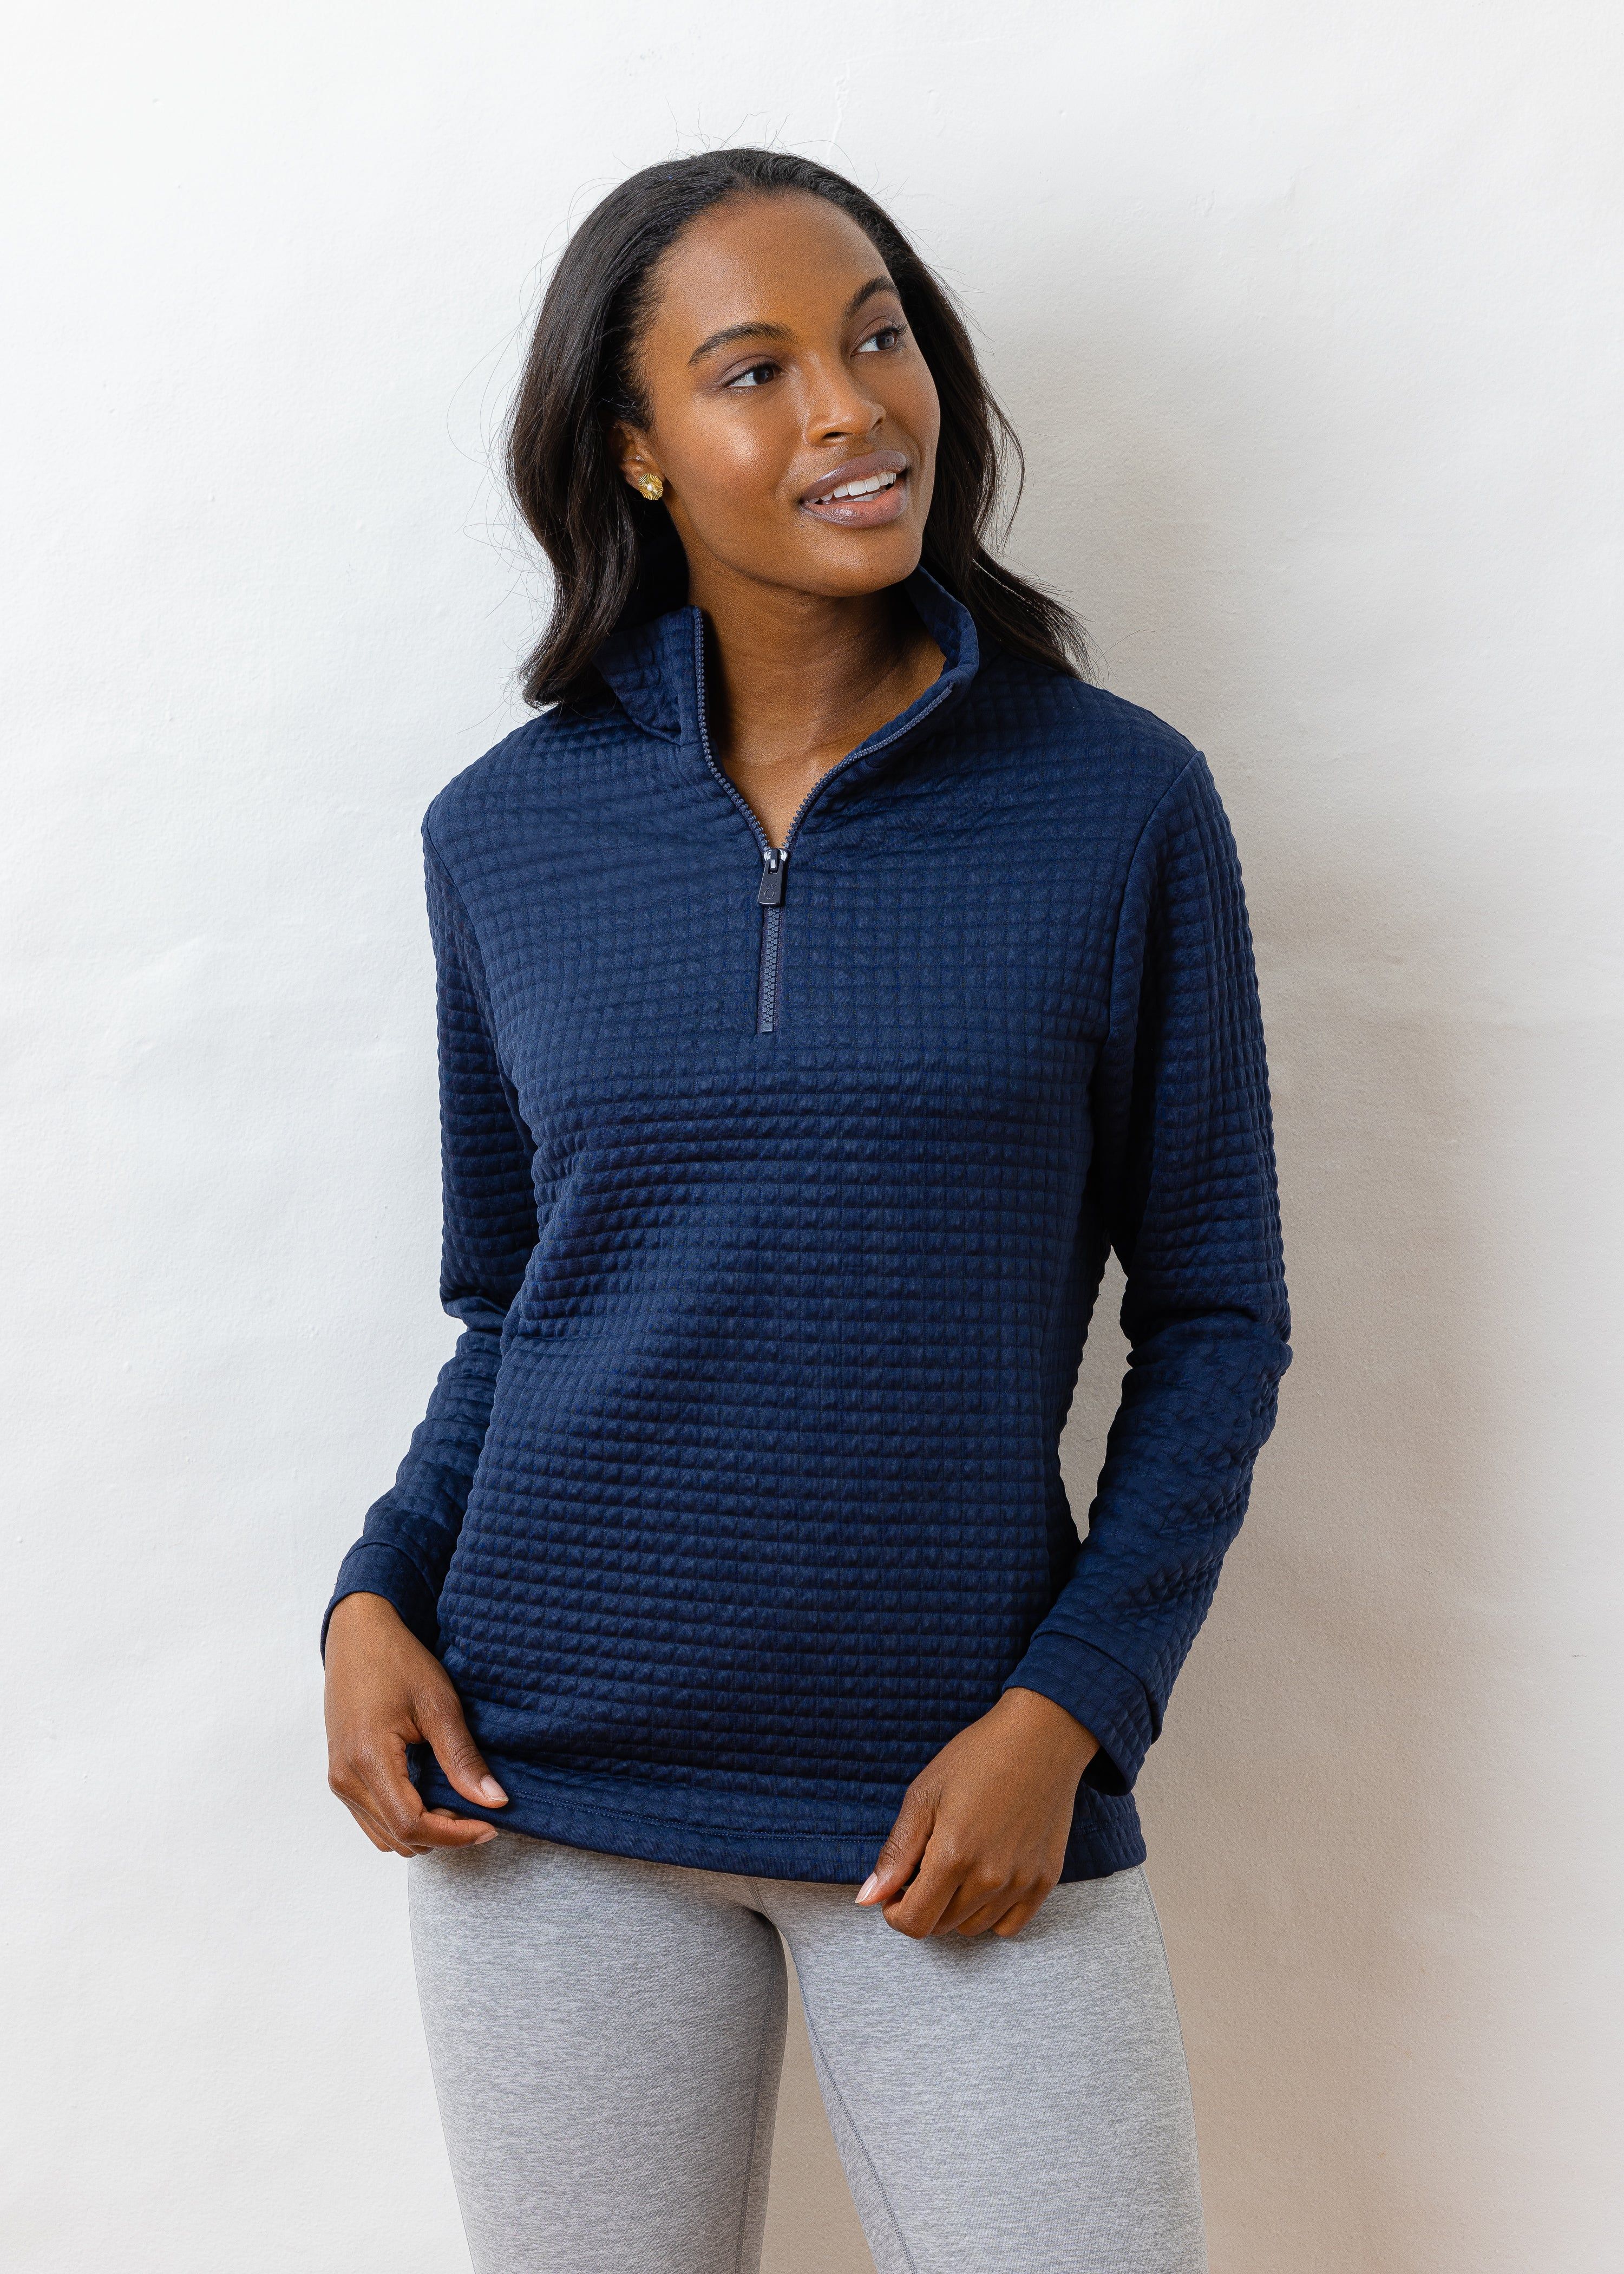 Pocomo Pullover in Waffle Jersey (Navy) | Dudley Stephens